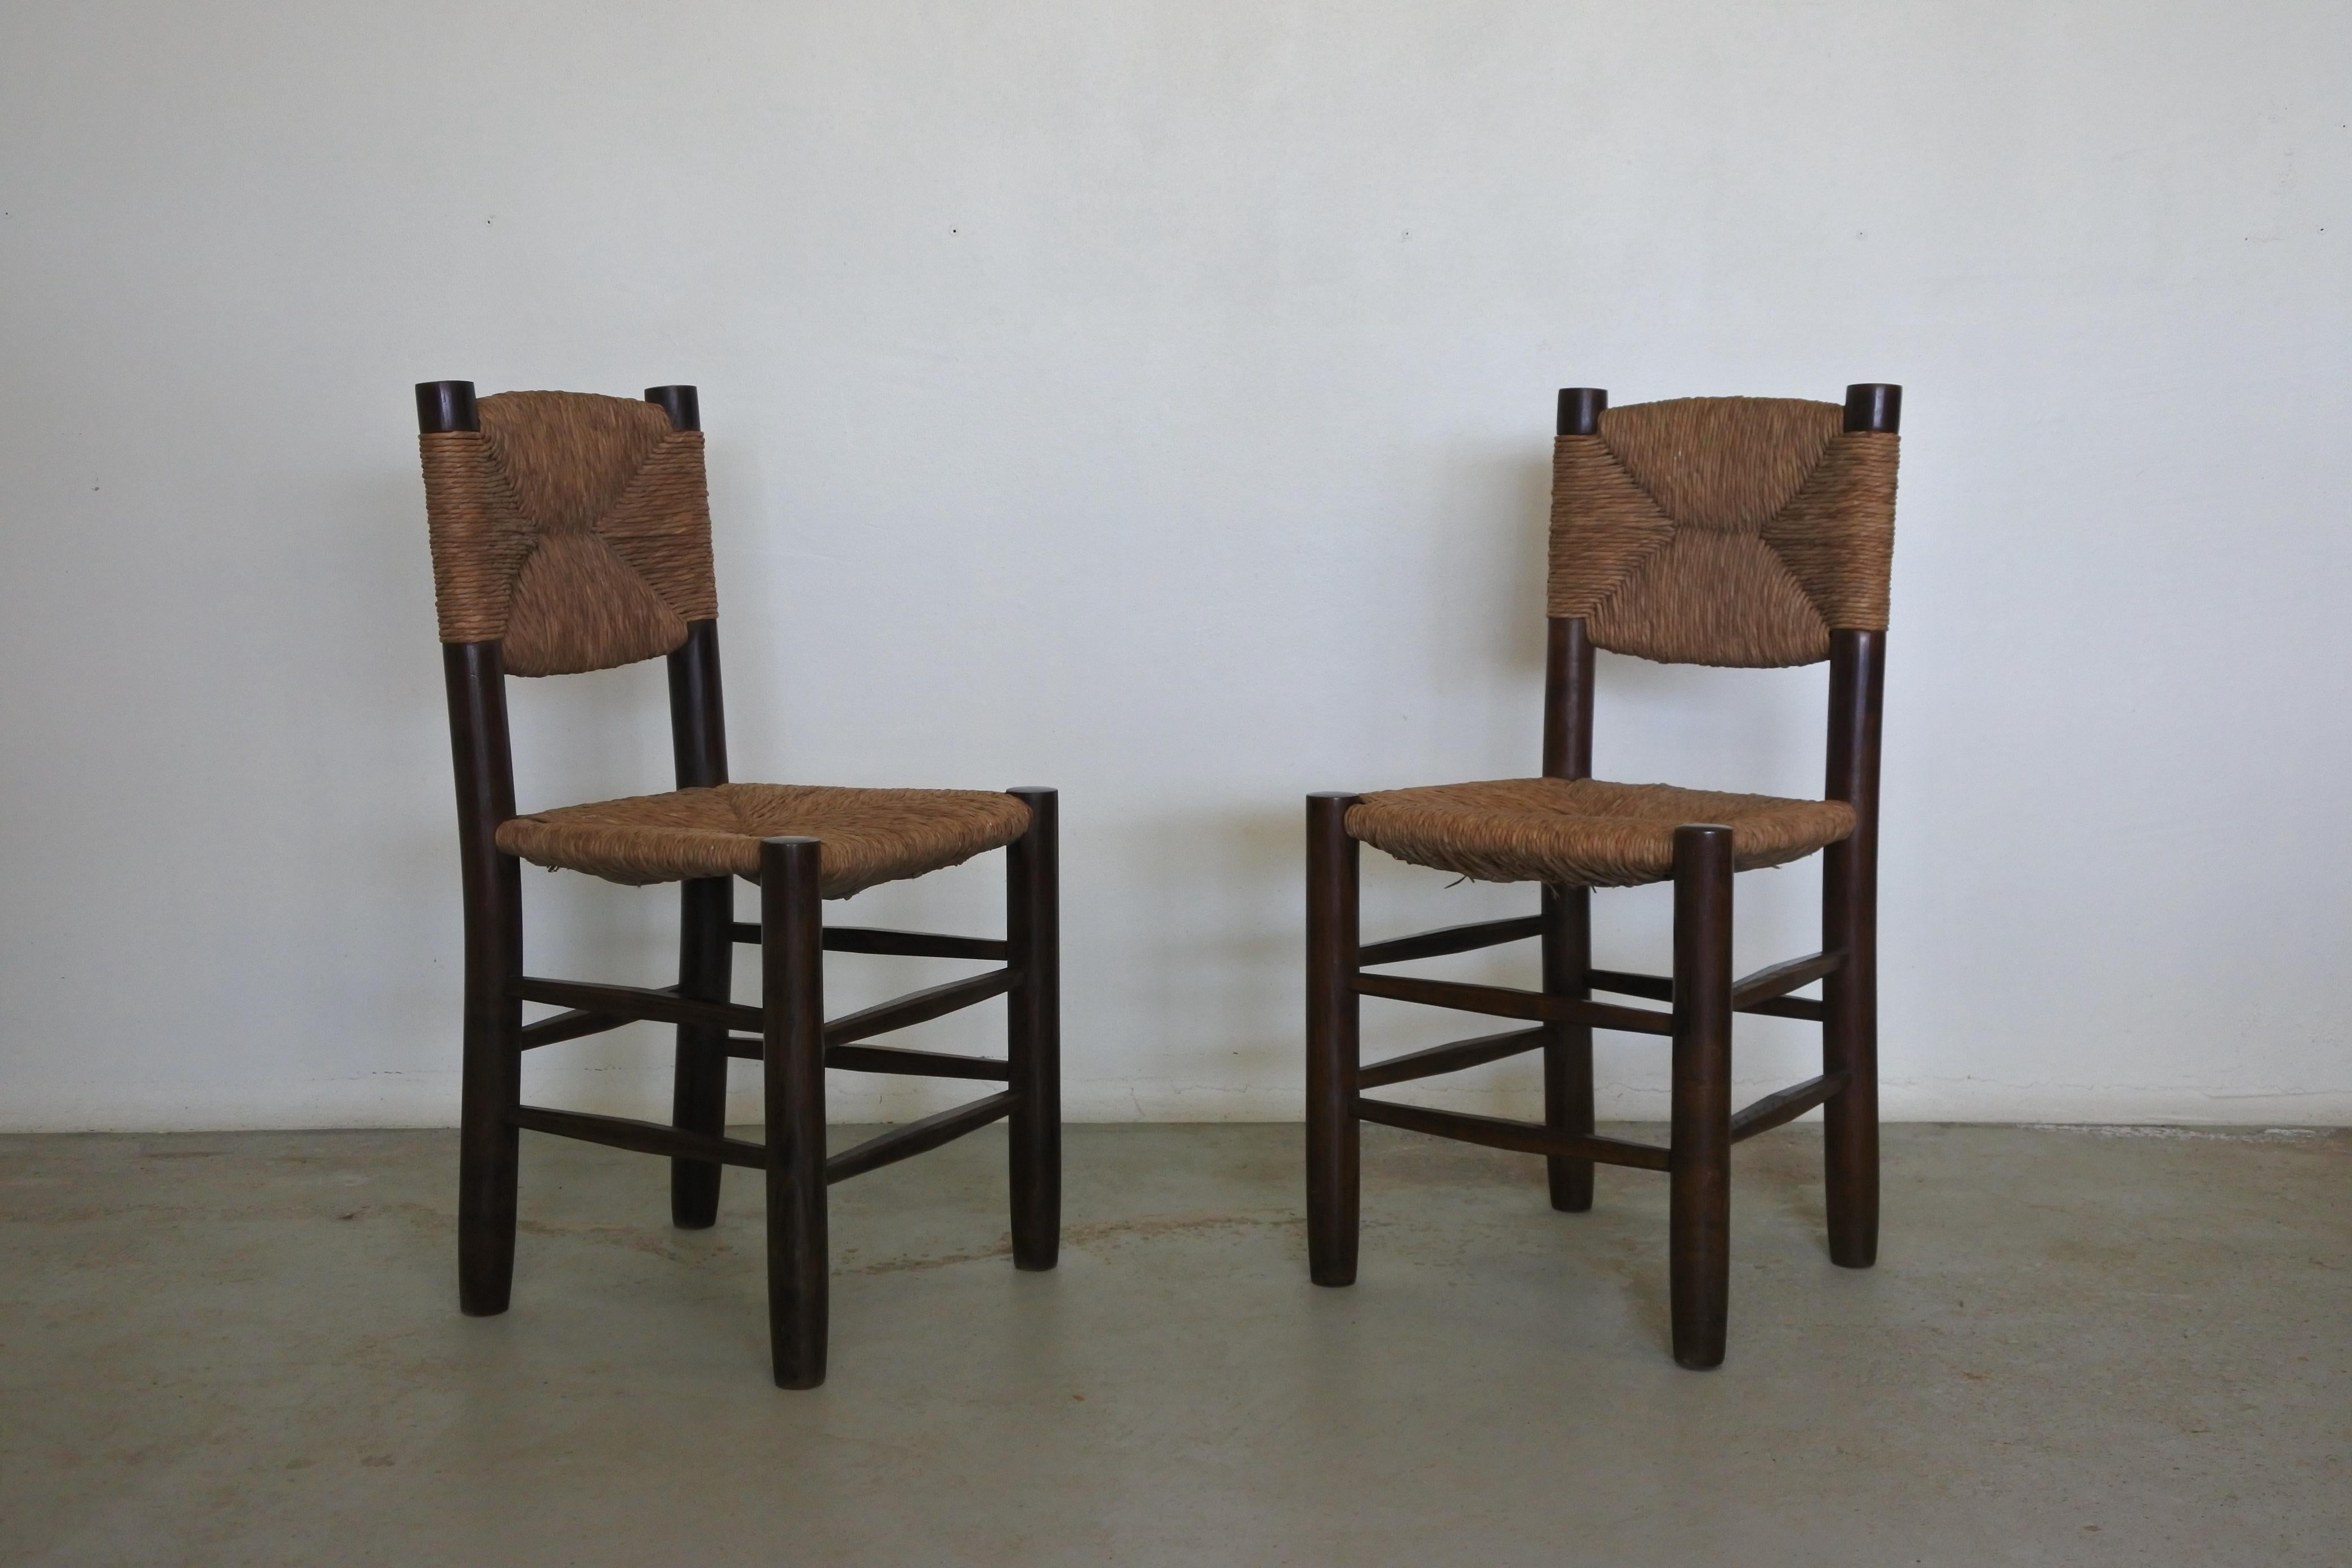 Set of 2 Bauche chairs by Charlotte Perriand.
Solid ash wood and straw.
Model number 19 with tilted back.
Made by Robert Sentou in the early 1950s.
Literature: 